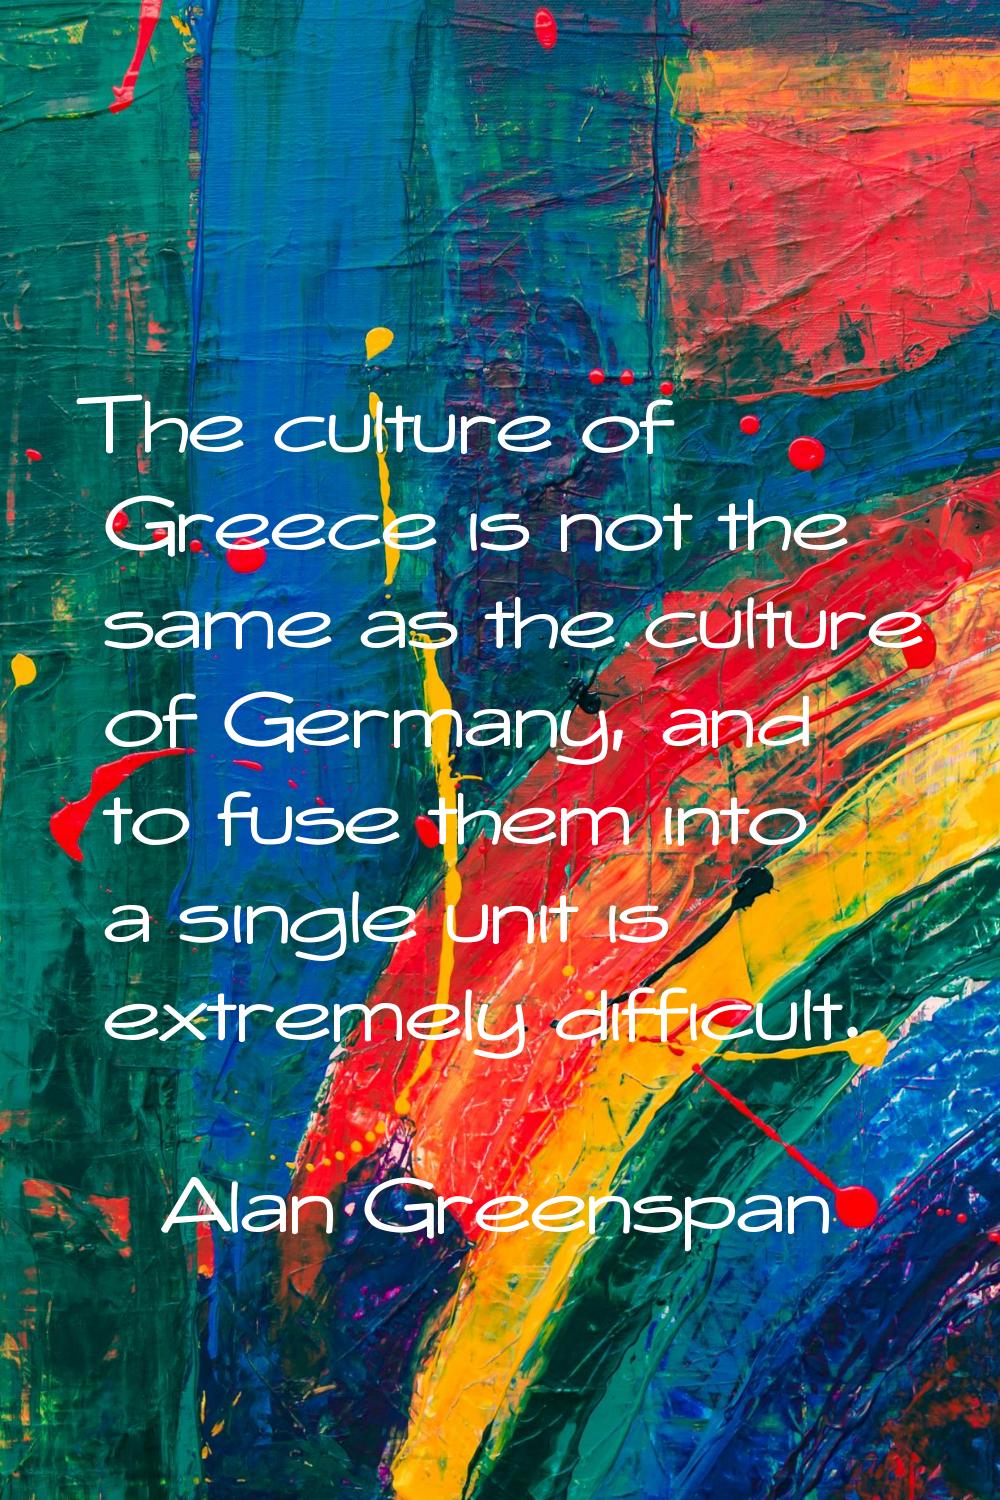 The culture of Greece is not the same as the culture of Germany, and to fuse them into a single uni